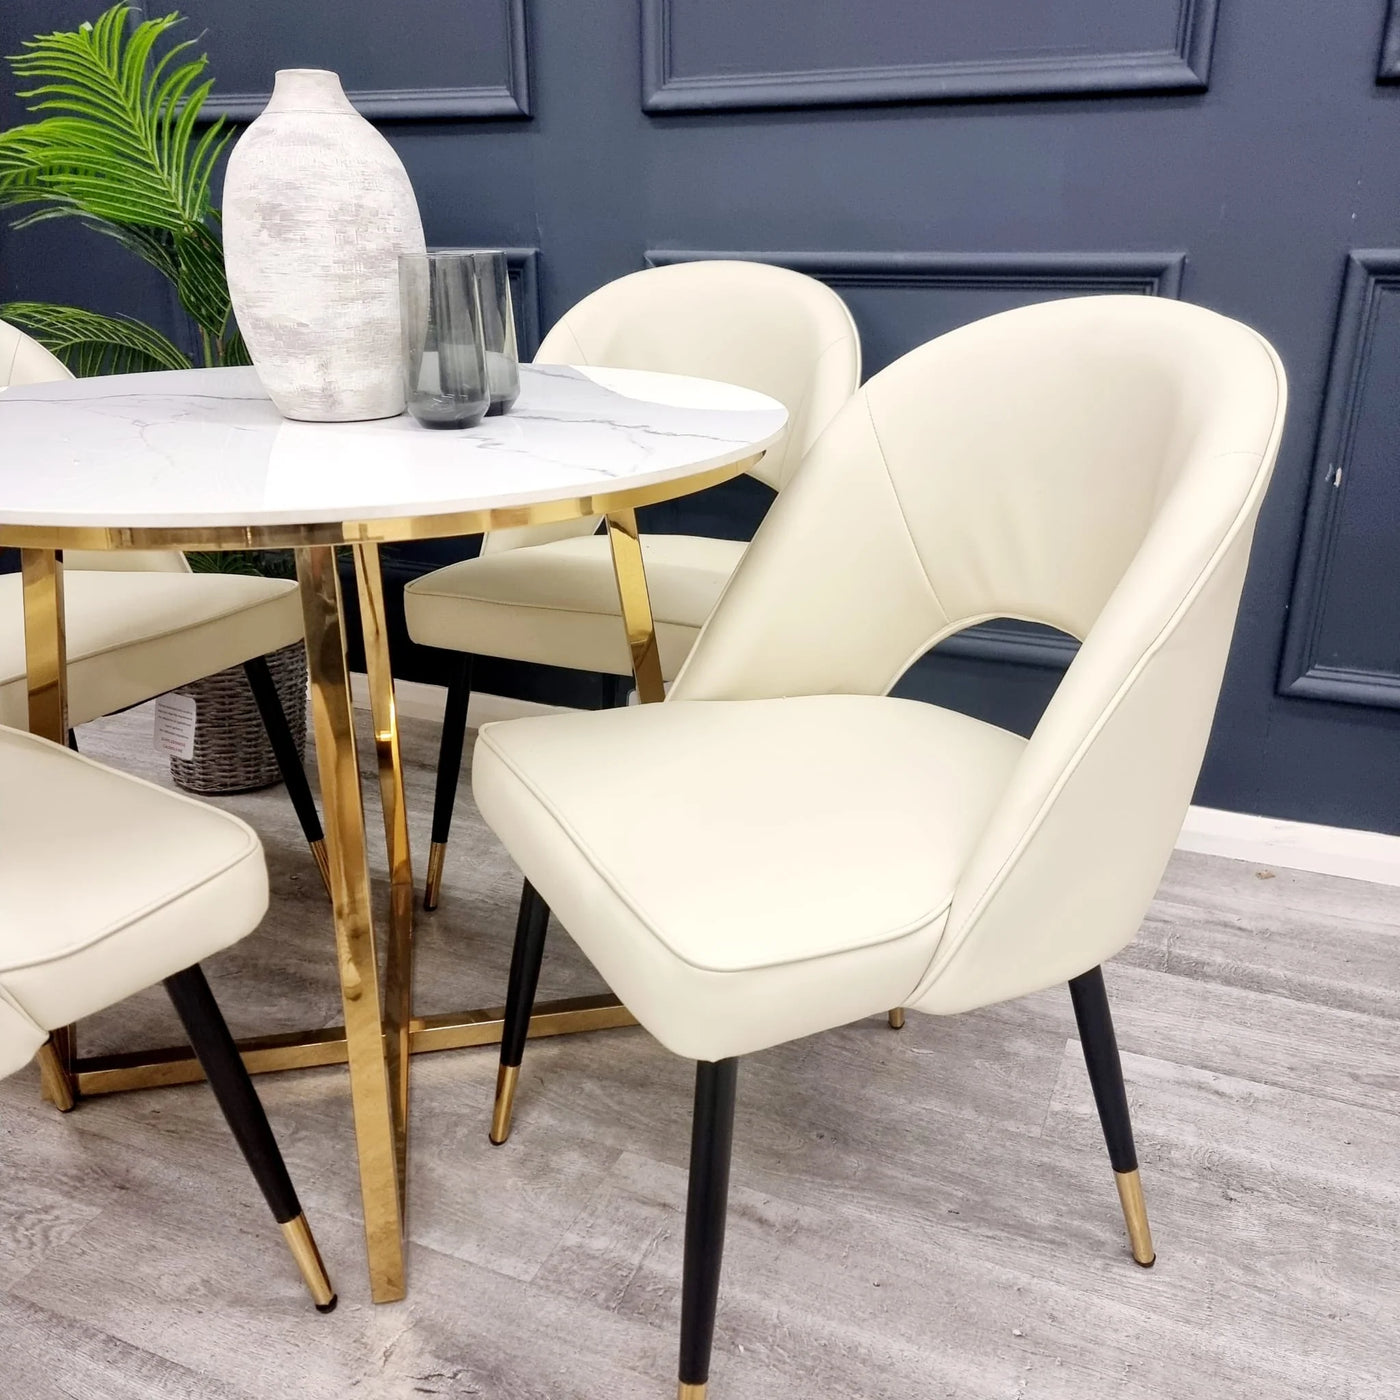 Freya 180cm Pine Wood Dining Table + Astra PU Leather / Fabric Dining Chairs